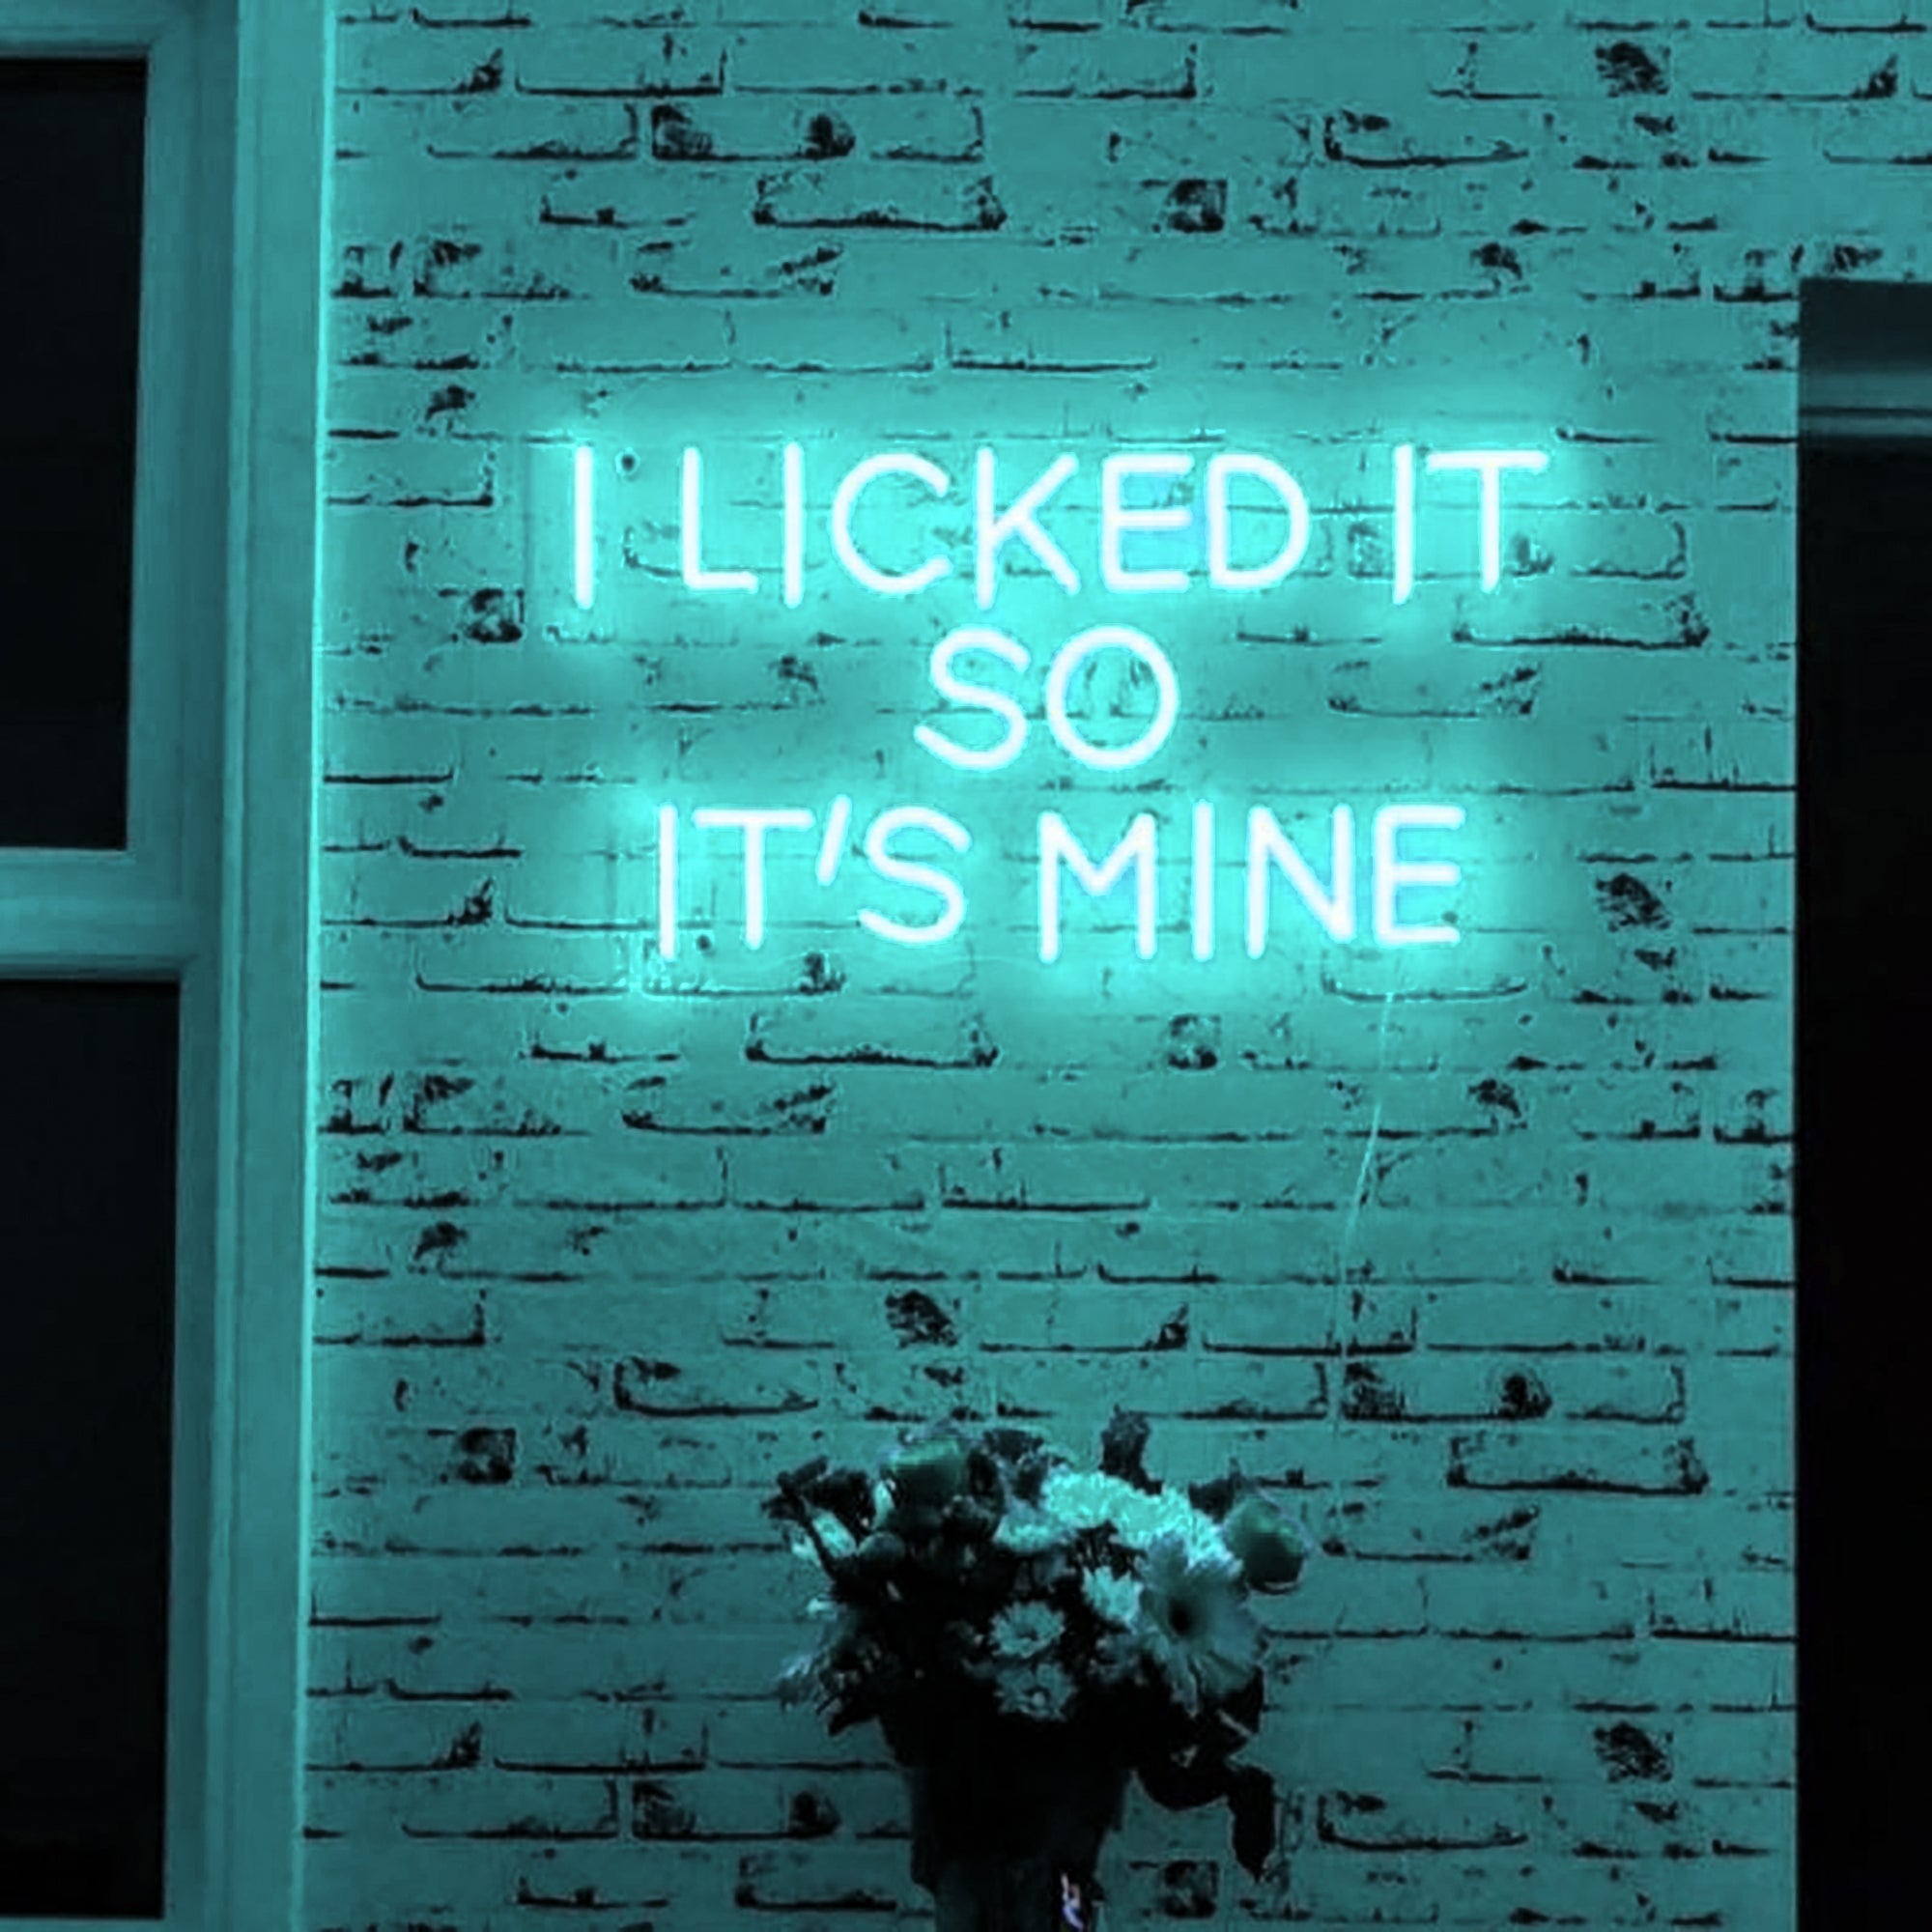 I Licked It So It's Mine Neon Led Sign - Neoncraftsman